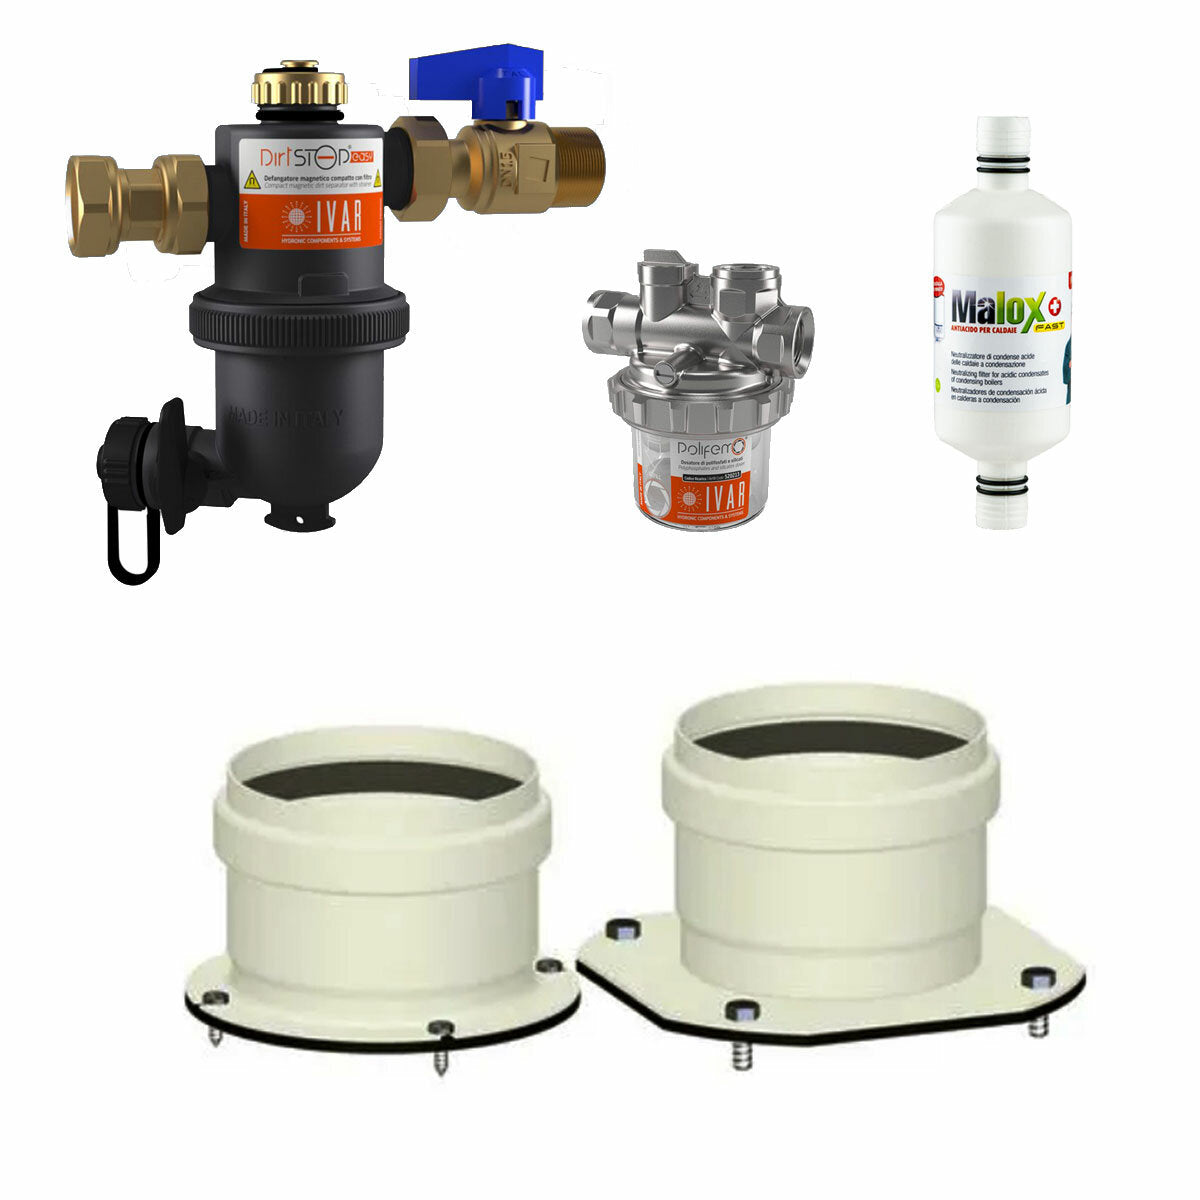 Immergas boiler installation kit with dirt separator - polyphosphate dispenser - condensate neutralizer - double fume exhaust